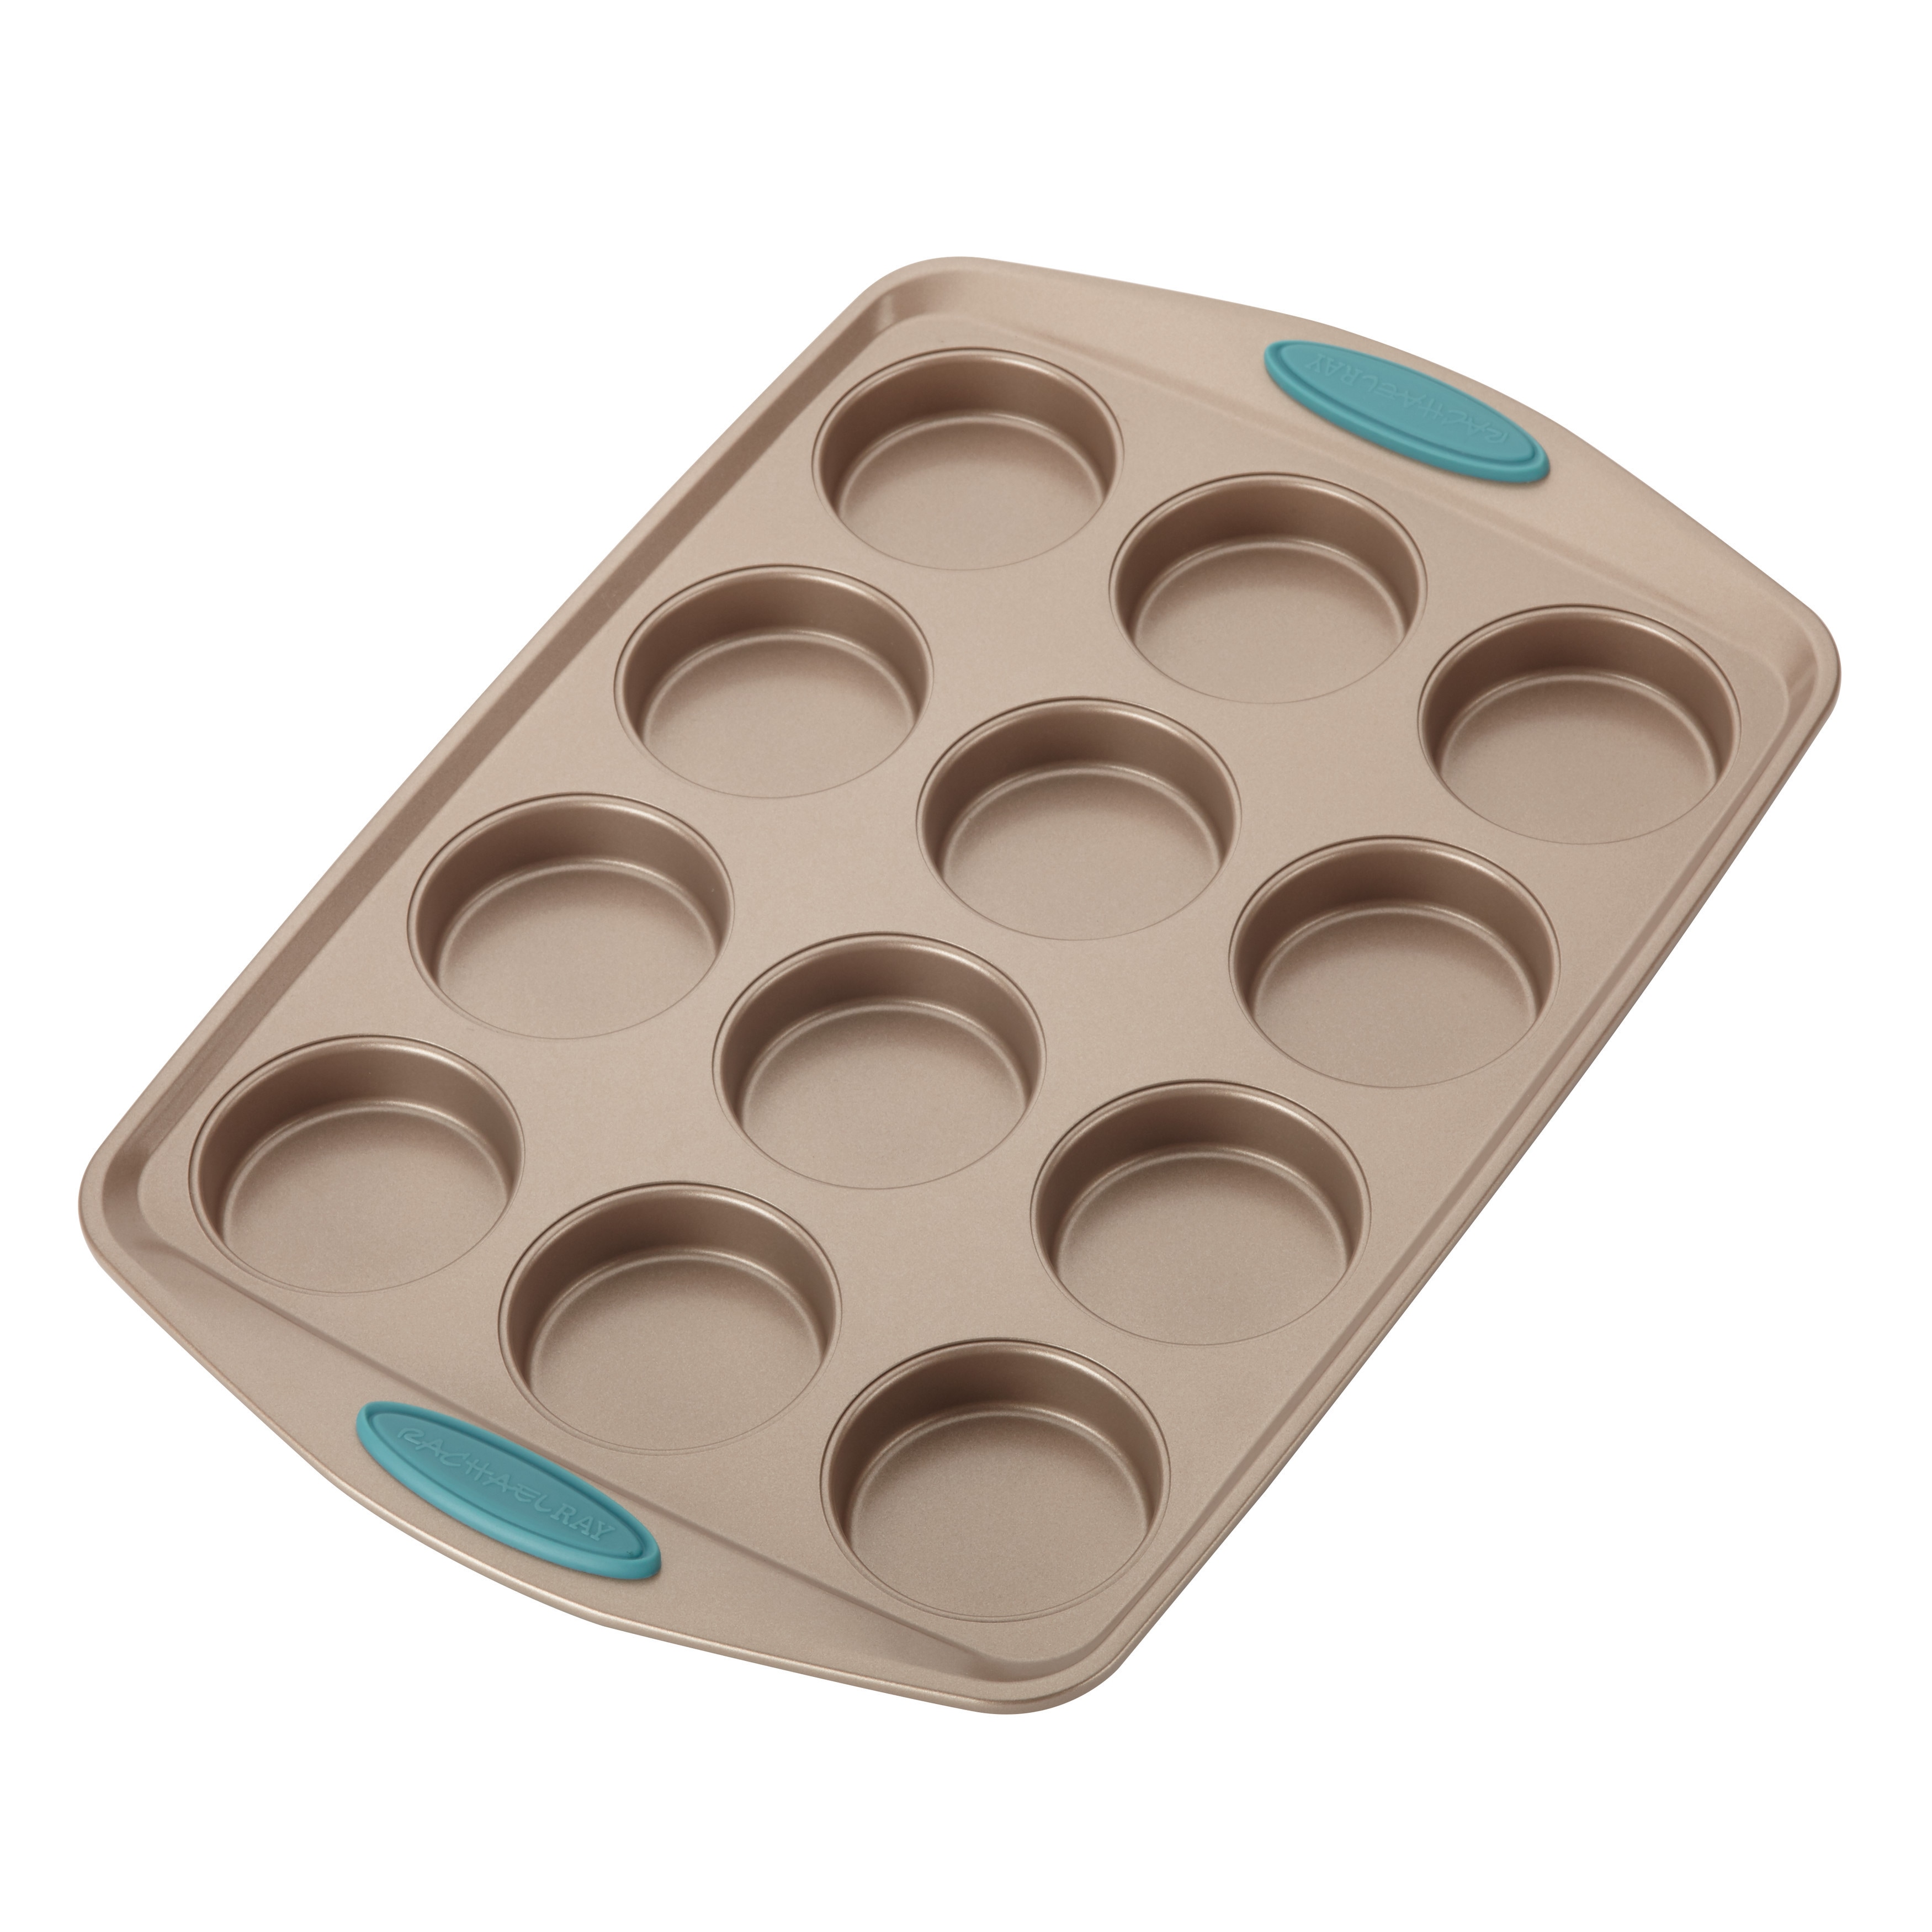 https://ak1.ostkcdn.com/images/products/13219274/Rachael-Ray-Cucina-Nonstick-Bakeware-12-Cup-Muffin-Cupcake-Pan-Latte-Brown-Agave-Blue-Handle-Grips-626b1edf-6792-4c85-a492-e4b17745fdc5.jpg